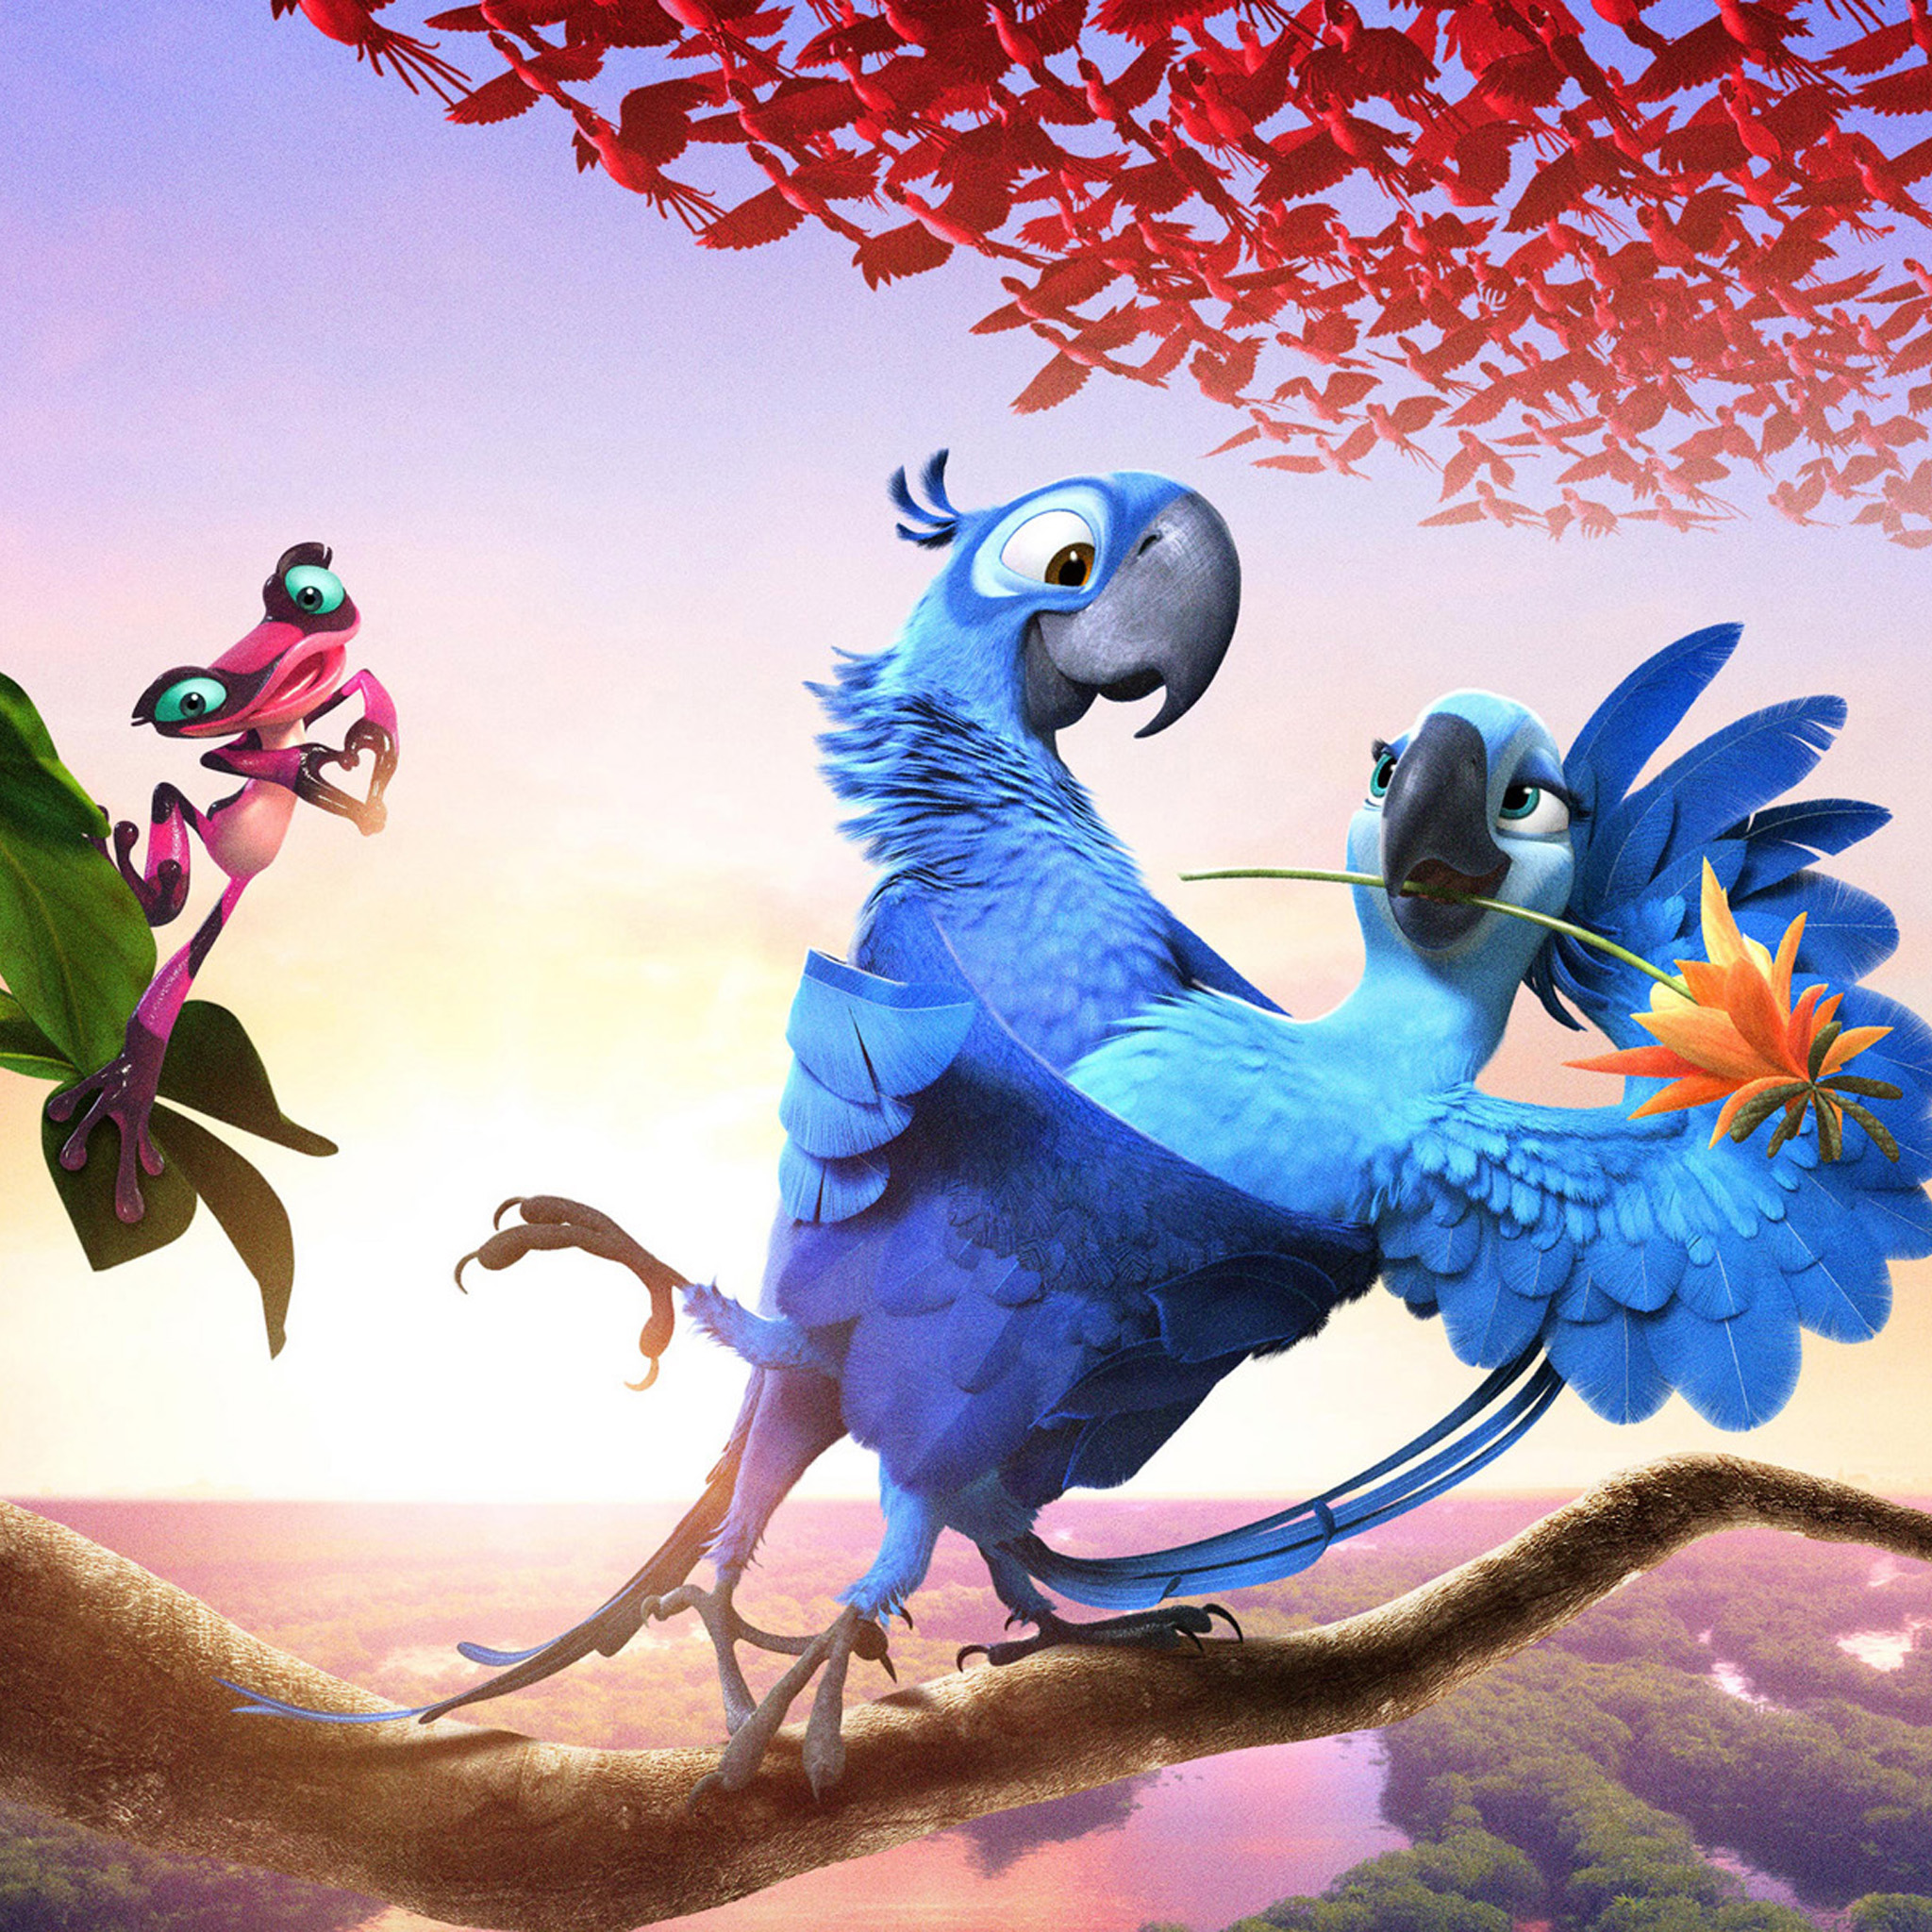 Rio2 Animated iPad Air 2 Wallpapers iPad Air 2 Backgrounds